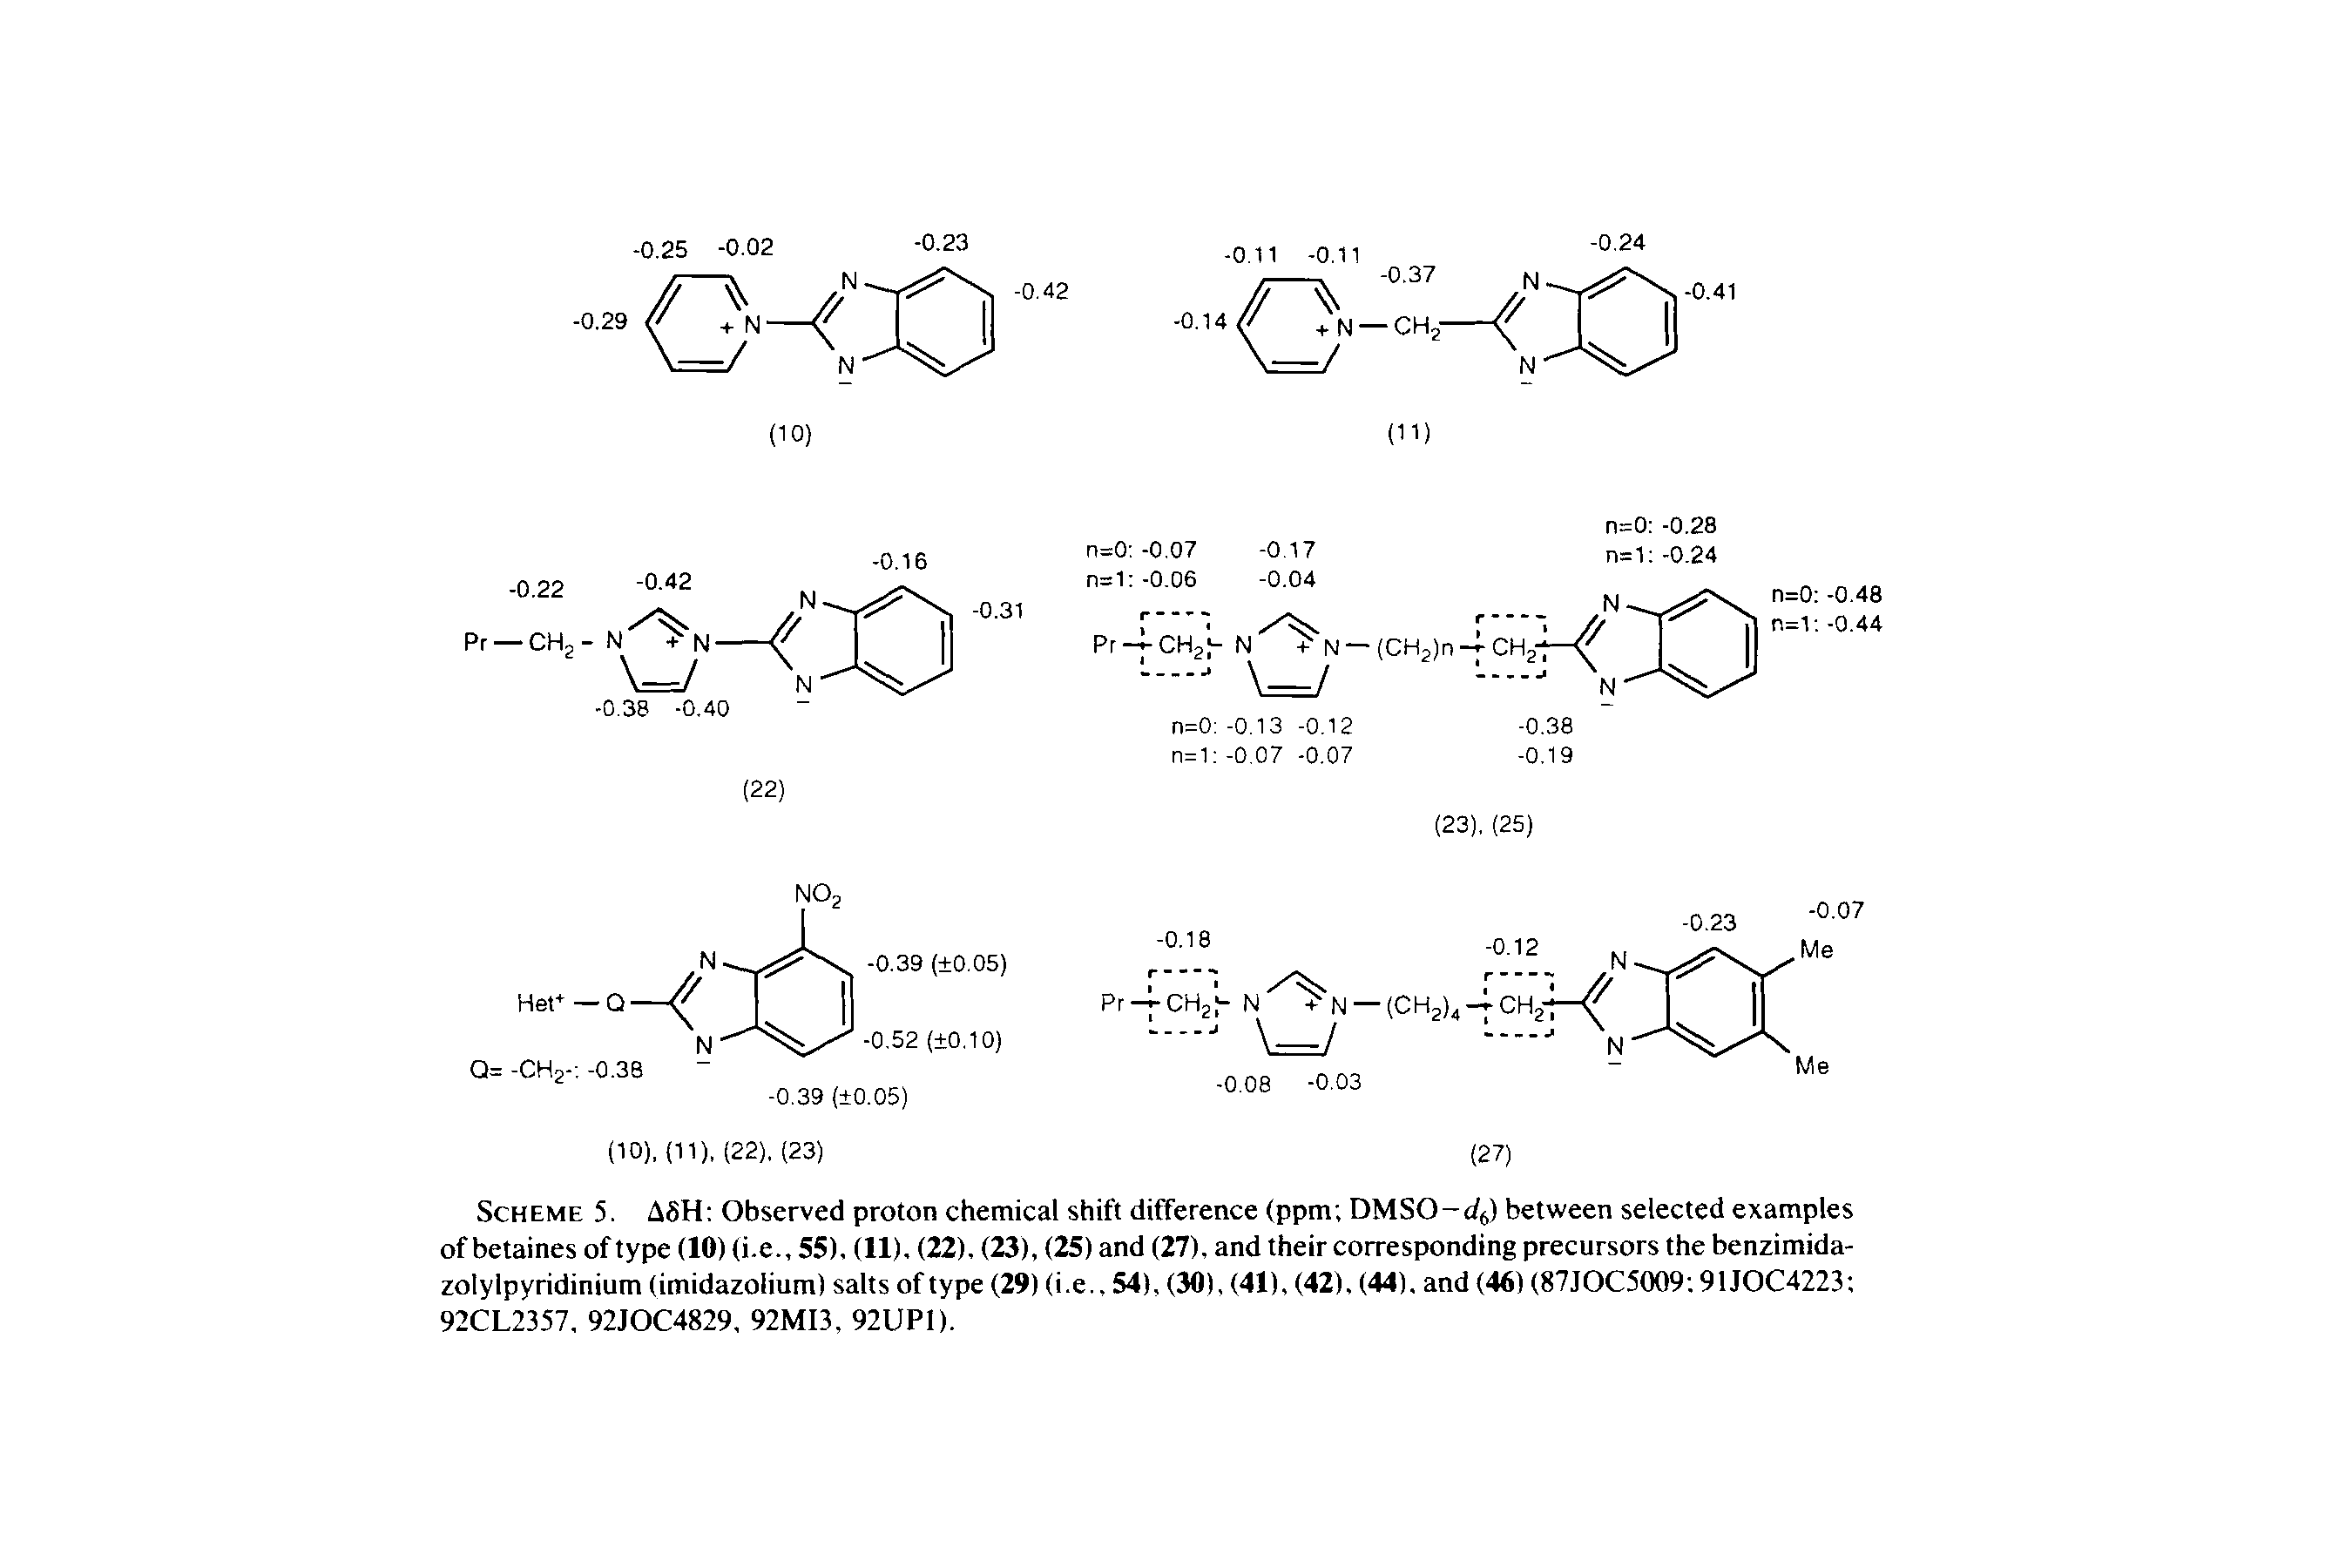 Scheme 5. ASH Observed proton chemical shift difference (ppm DMSO-rf ) between selected examples of betaines of type (10) (i.e., 55), (11), (22), (23), (25) and (27), and their corresponding precursors the benzimida-zolylpyridinium (imidazolium) salts of type (29) (i.e., 54), (30), (41), (42), (44), and (46) (87JOC5009 91JOC4223 92CL2357, 92JOC4829, 92MI3, 92UP1).